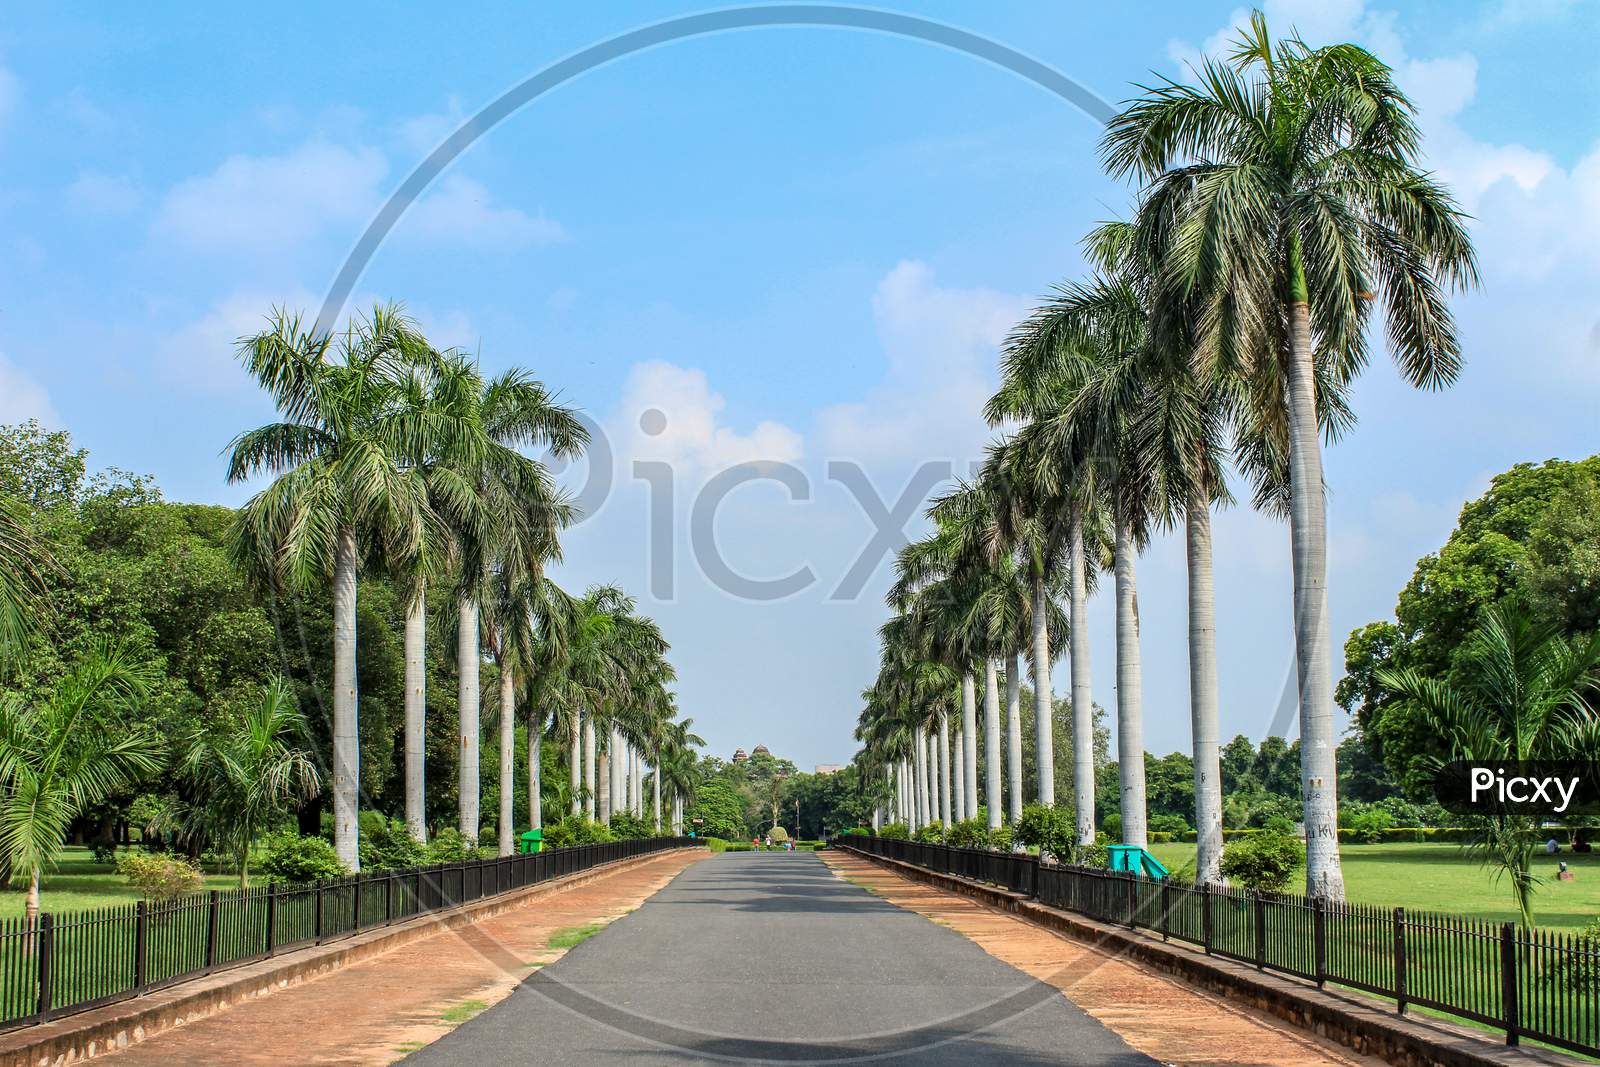 Landscape Of A Road In The Middle With Tress On The Either Sides Of It.